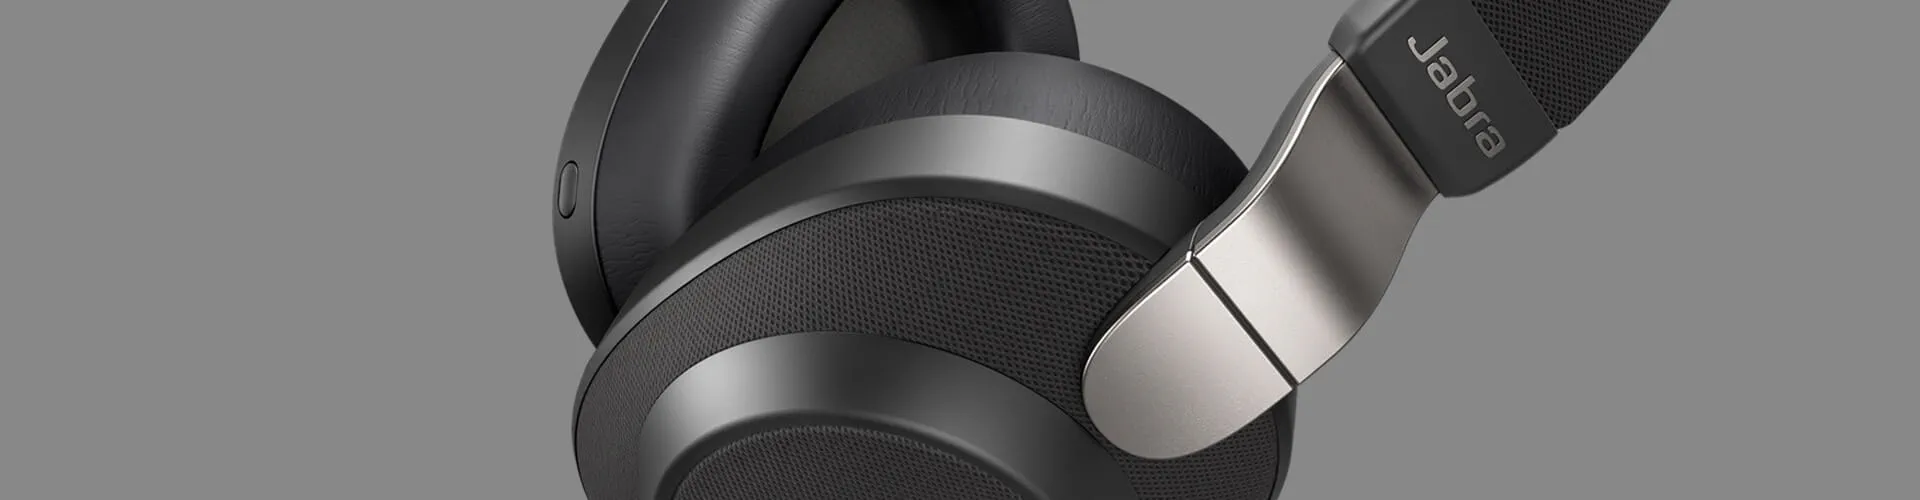 Jabra announces its most premium (and toughest) earbuds yet - The Verge